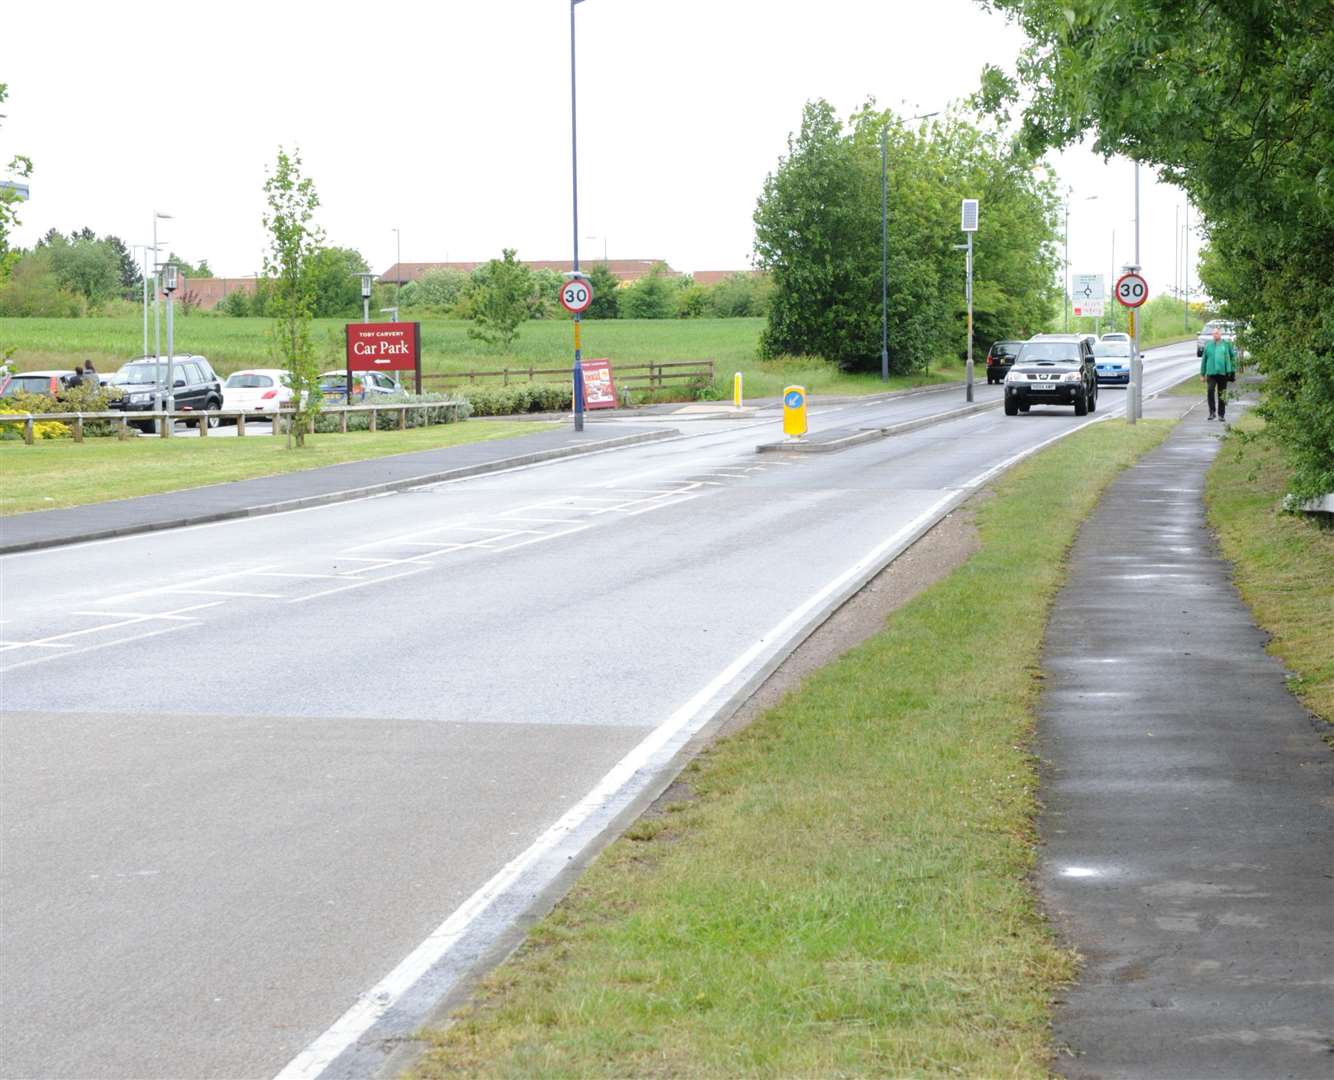 Residents living in the area say there's no way the roads could cope with another 400 homes